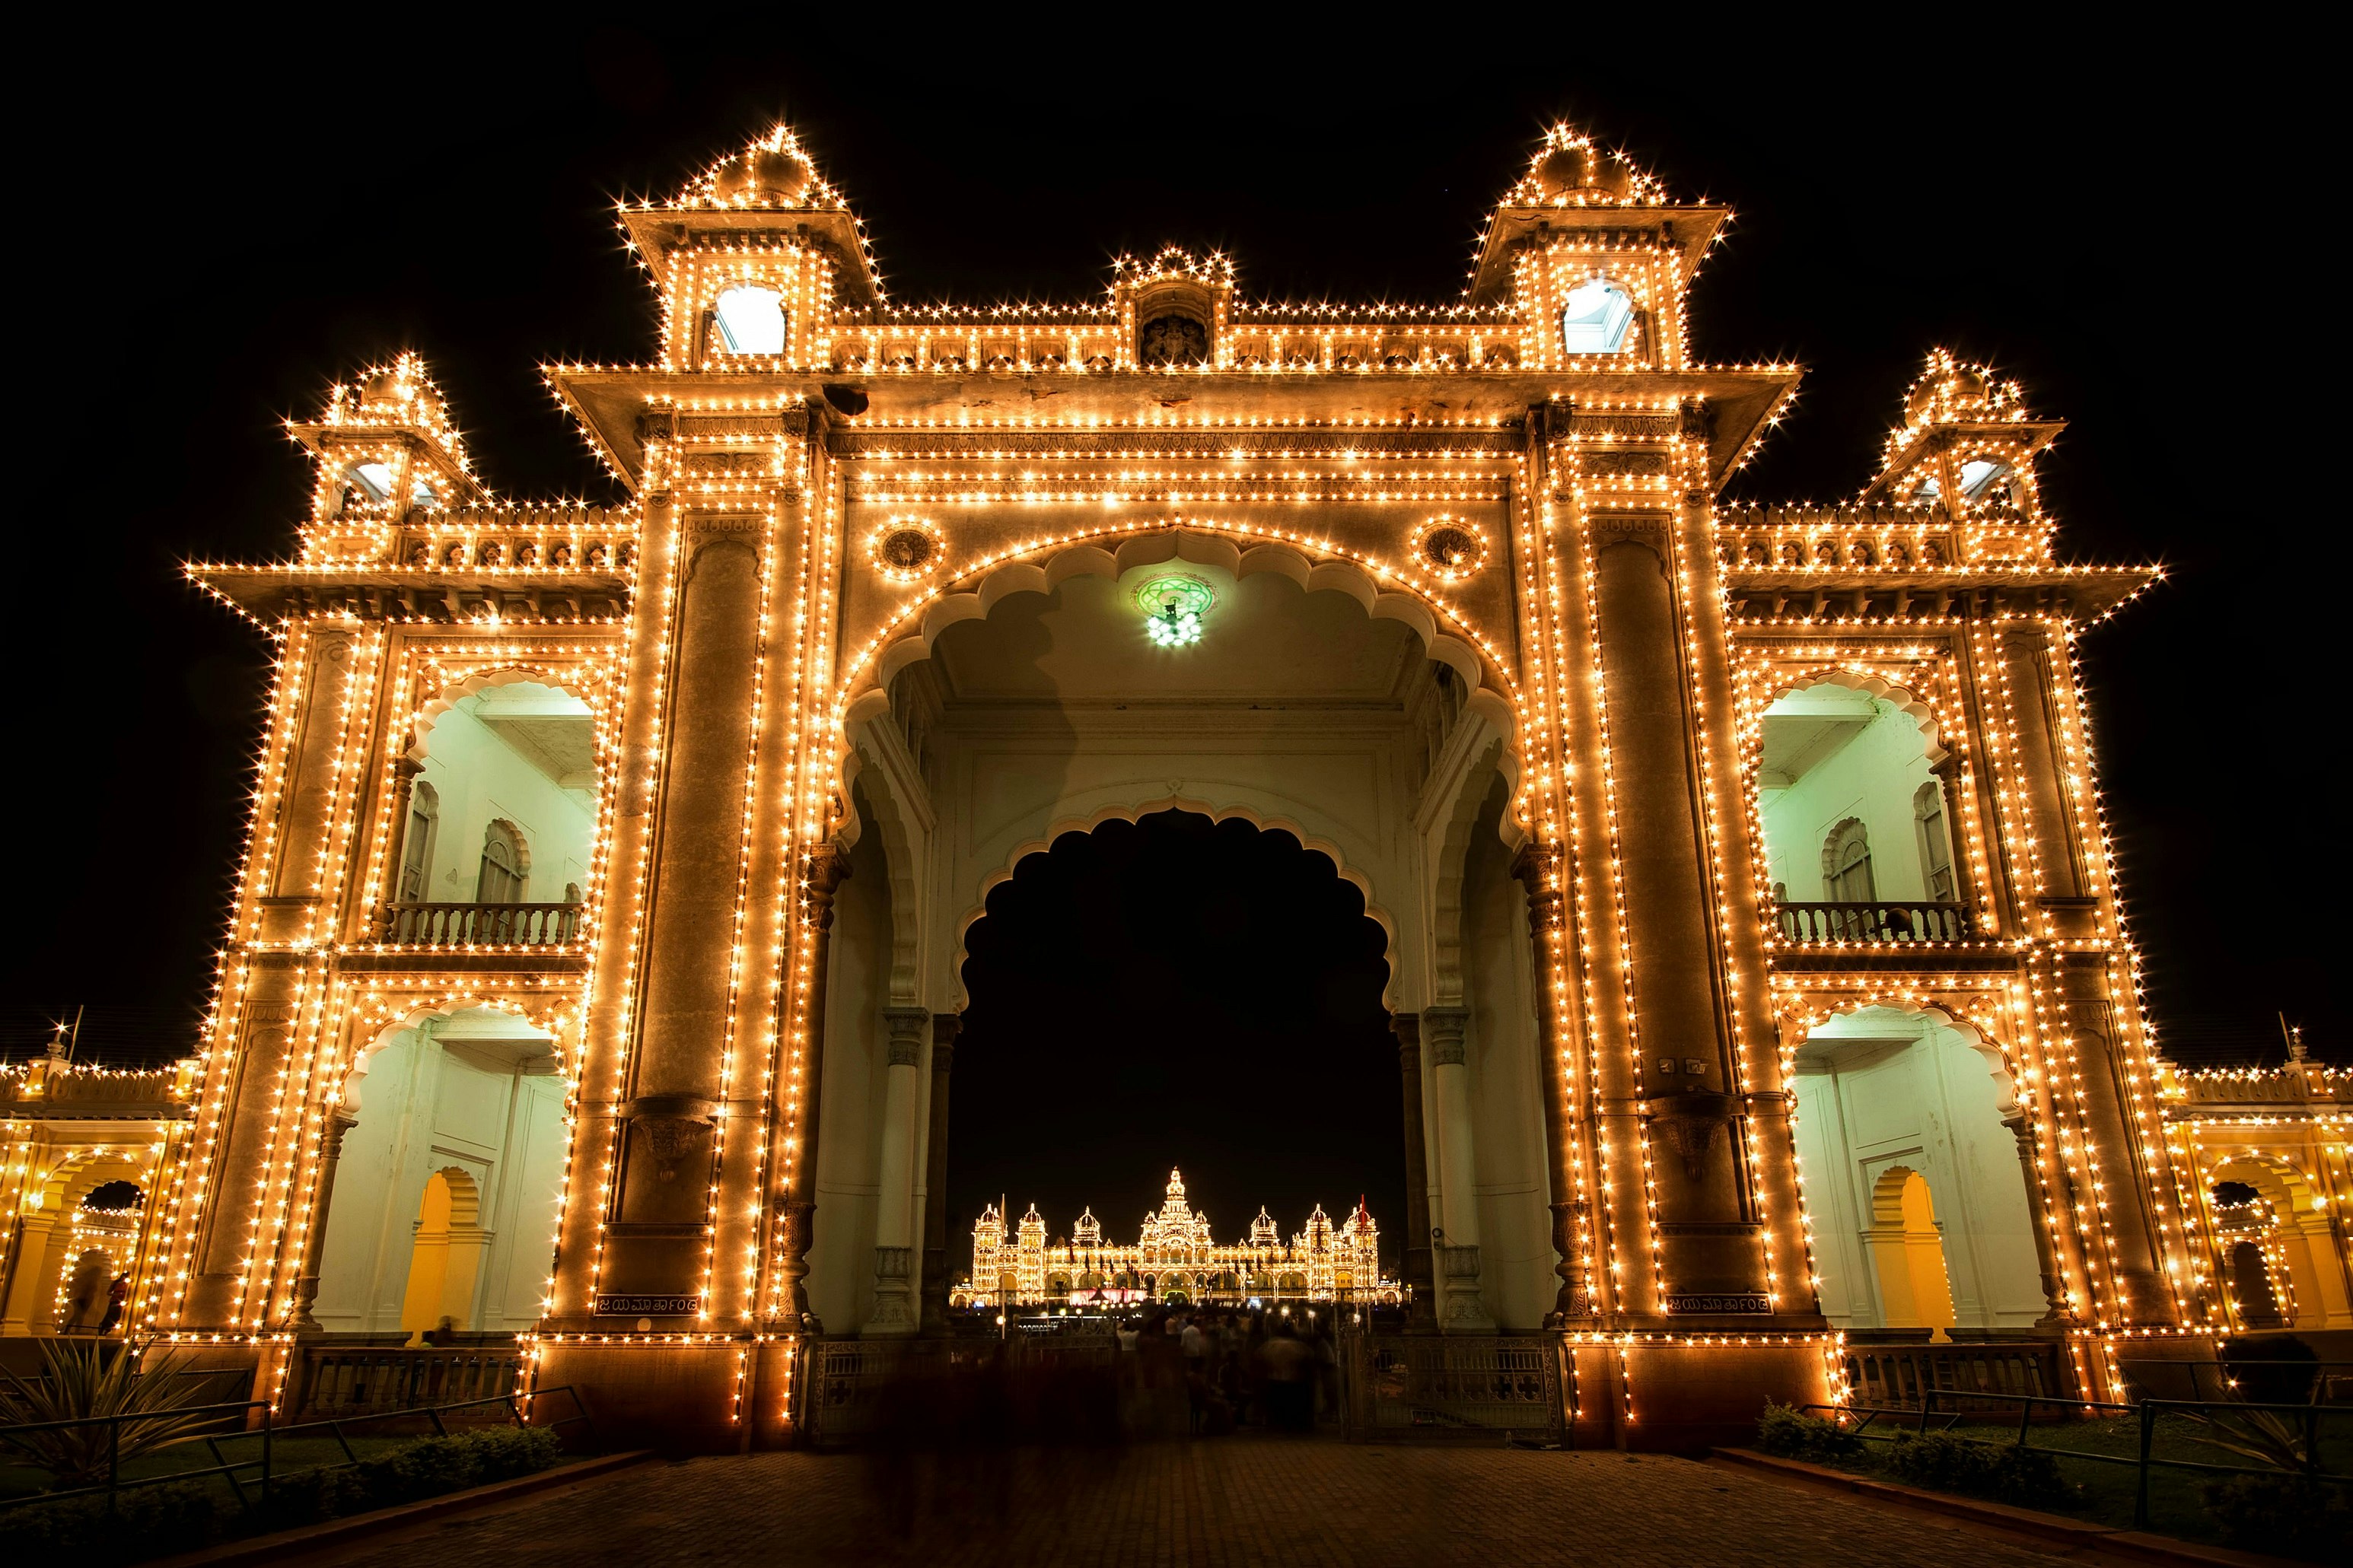 The grand Mysuru Palace, illuminated by thousands of light bulbs, glows in the darkness.